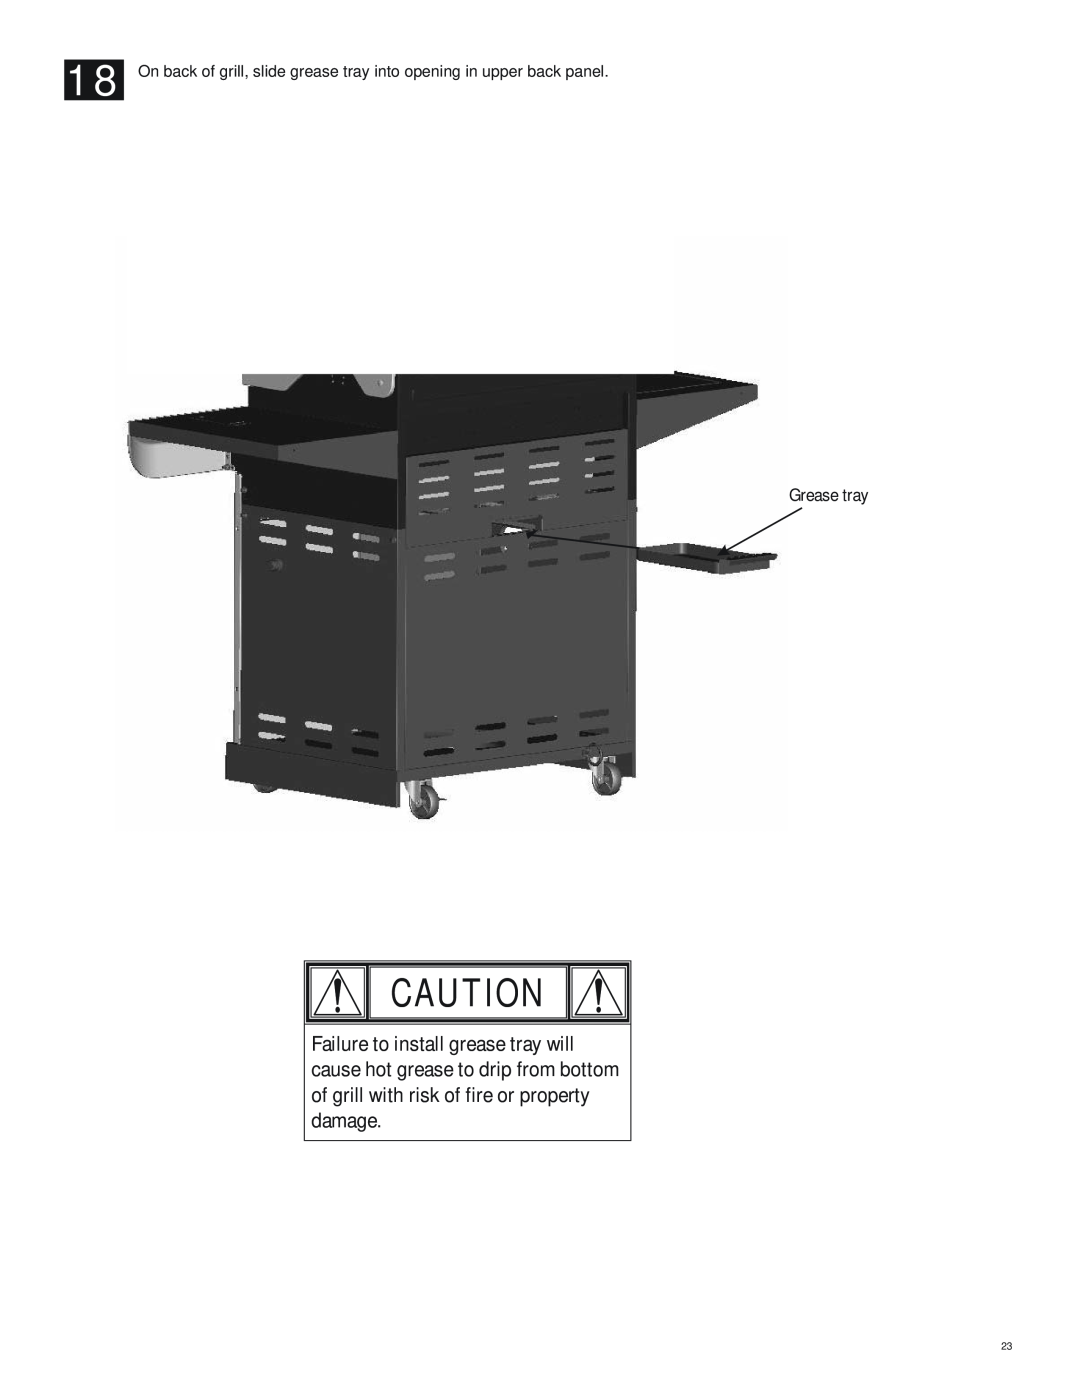 Char-Broil 415.9011211, 466224611 manual On back of grill, slide grease tray into opening in upper back panel, Grease tray 